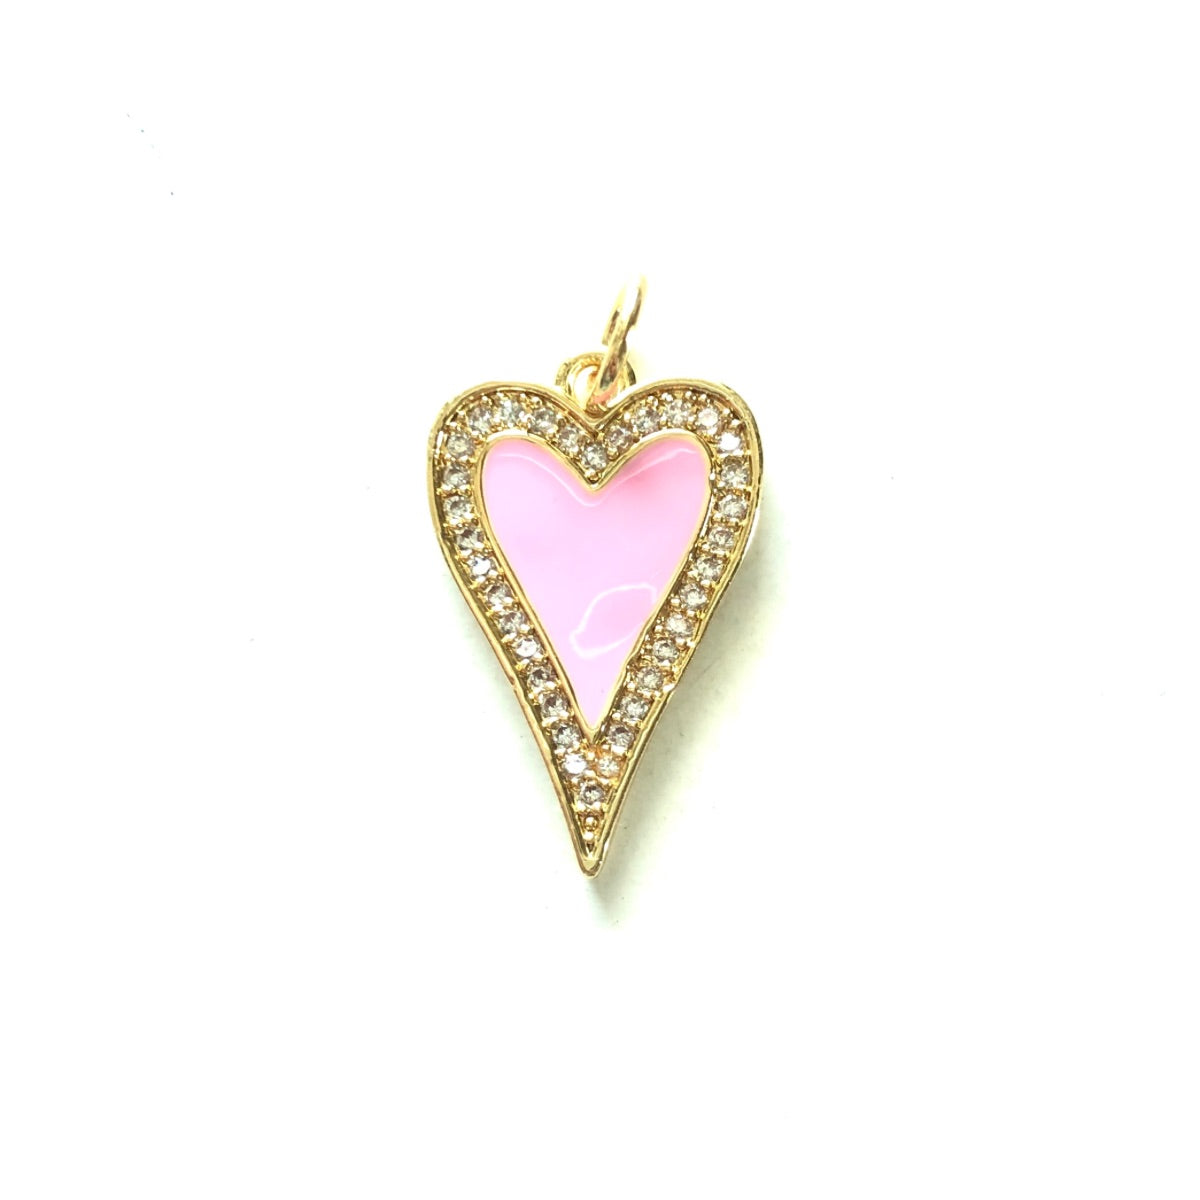 10pcs/lot 23.4*14.6mm Red, Pink, White, Black, Fuchsia Enamel CZ Pave Heart Charms-Gold Pink CZ Paved Charms Hearts New Charms Arrivals Charms Beads Beyond